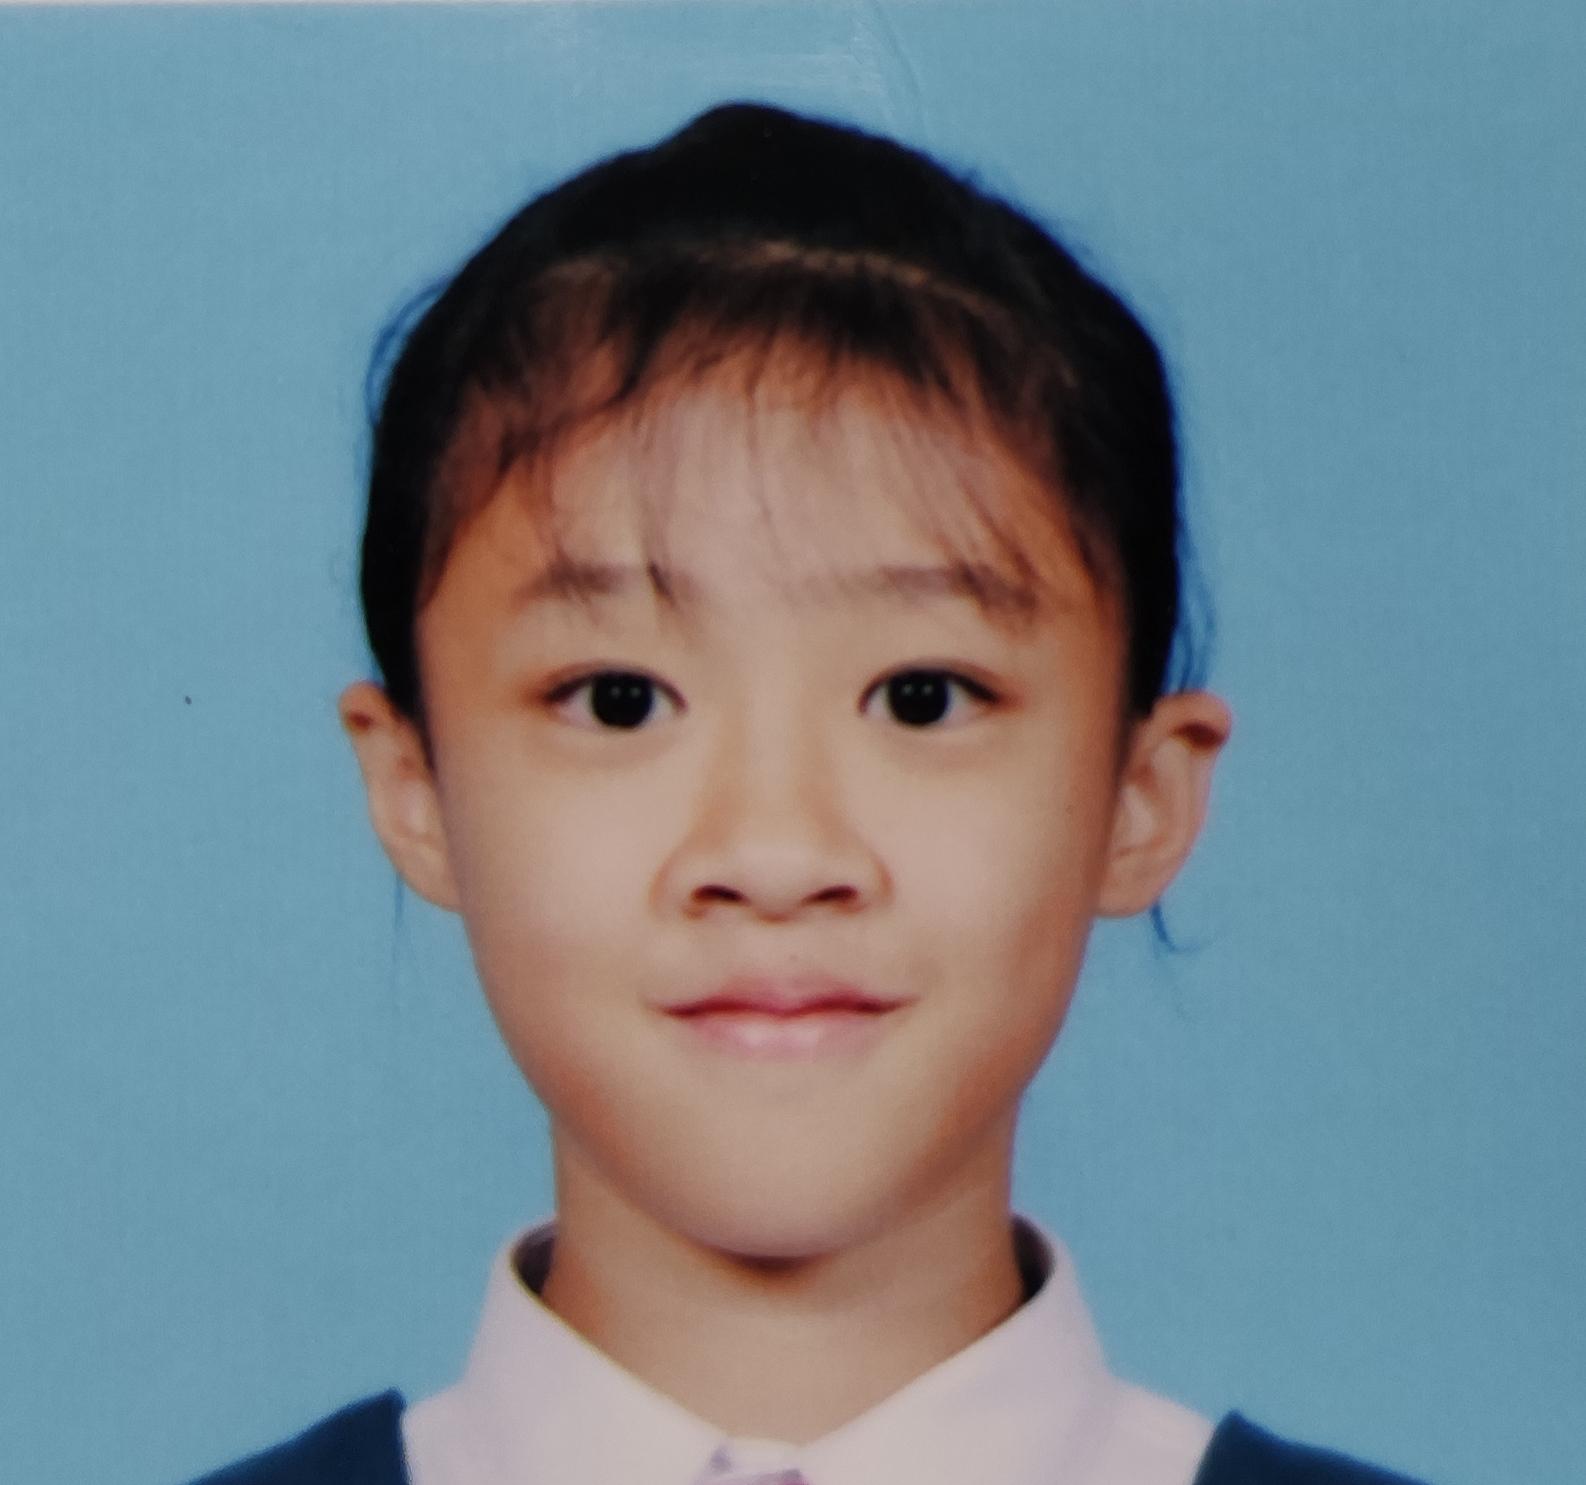 Wong Sze-ching, aged 15, is about 1.7 metres tall, 48 kilograms in weight and of medium build. She has a pointed face with yellow complexion and long black hair. She was last seen wearing a white T-shirt, a white jacket and a grey dress.
